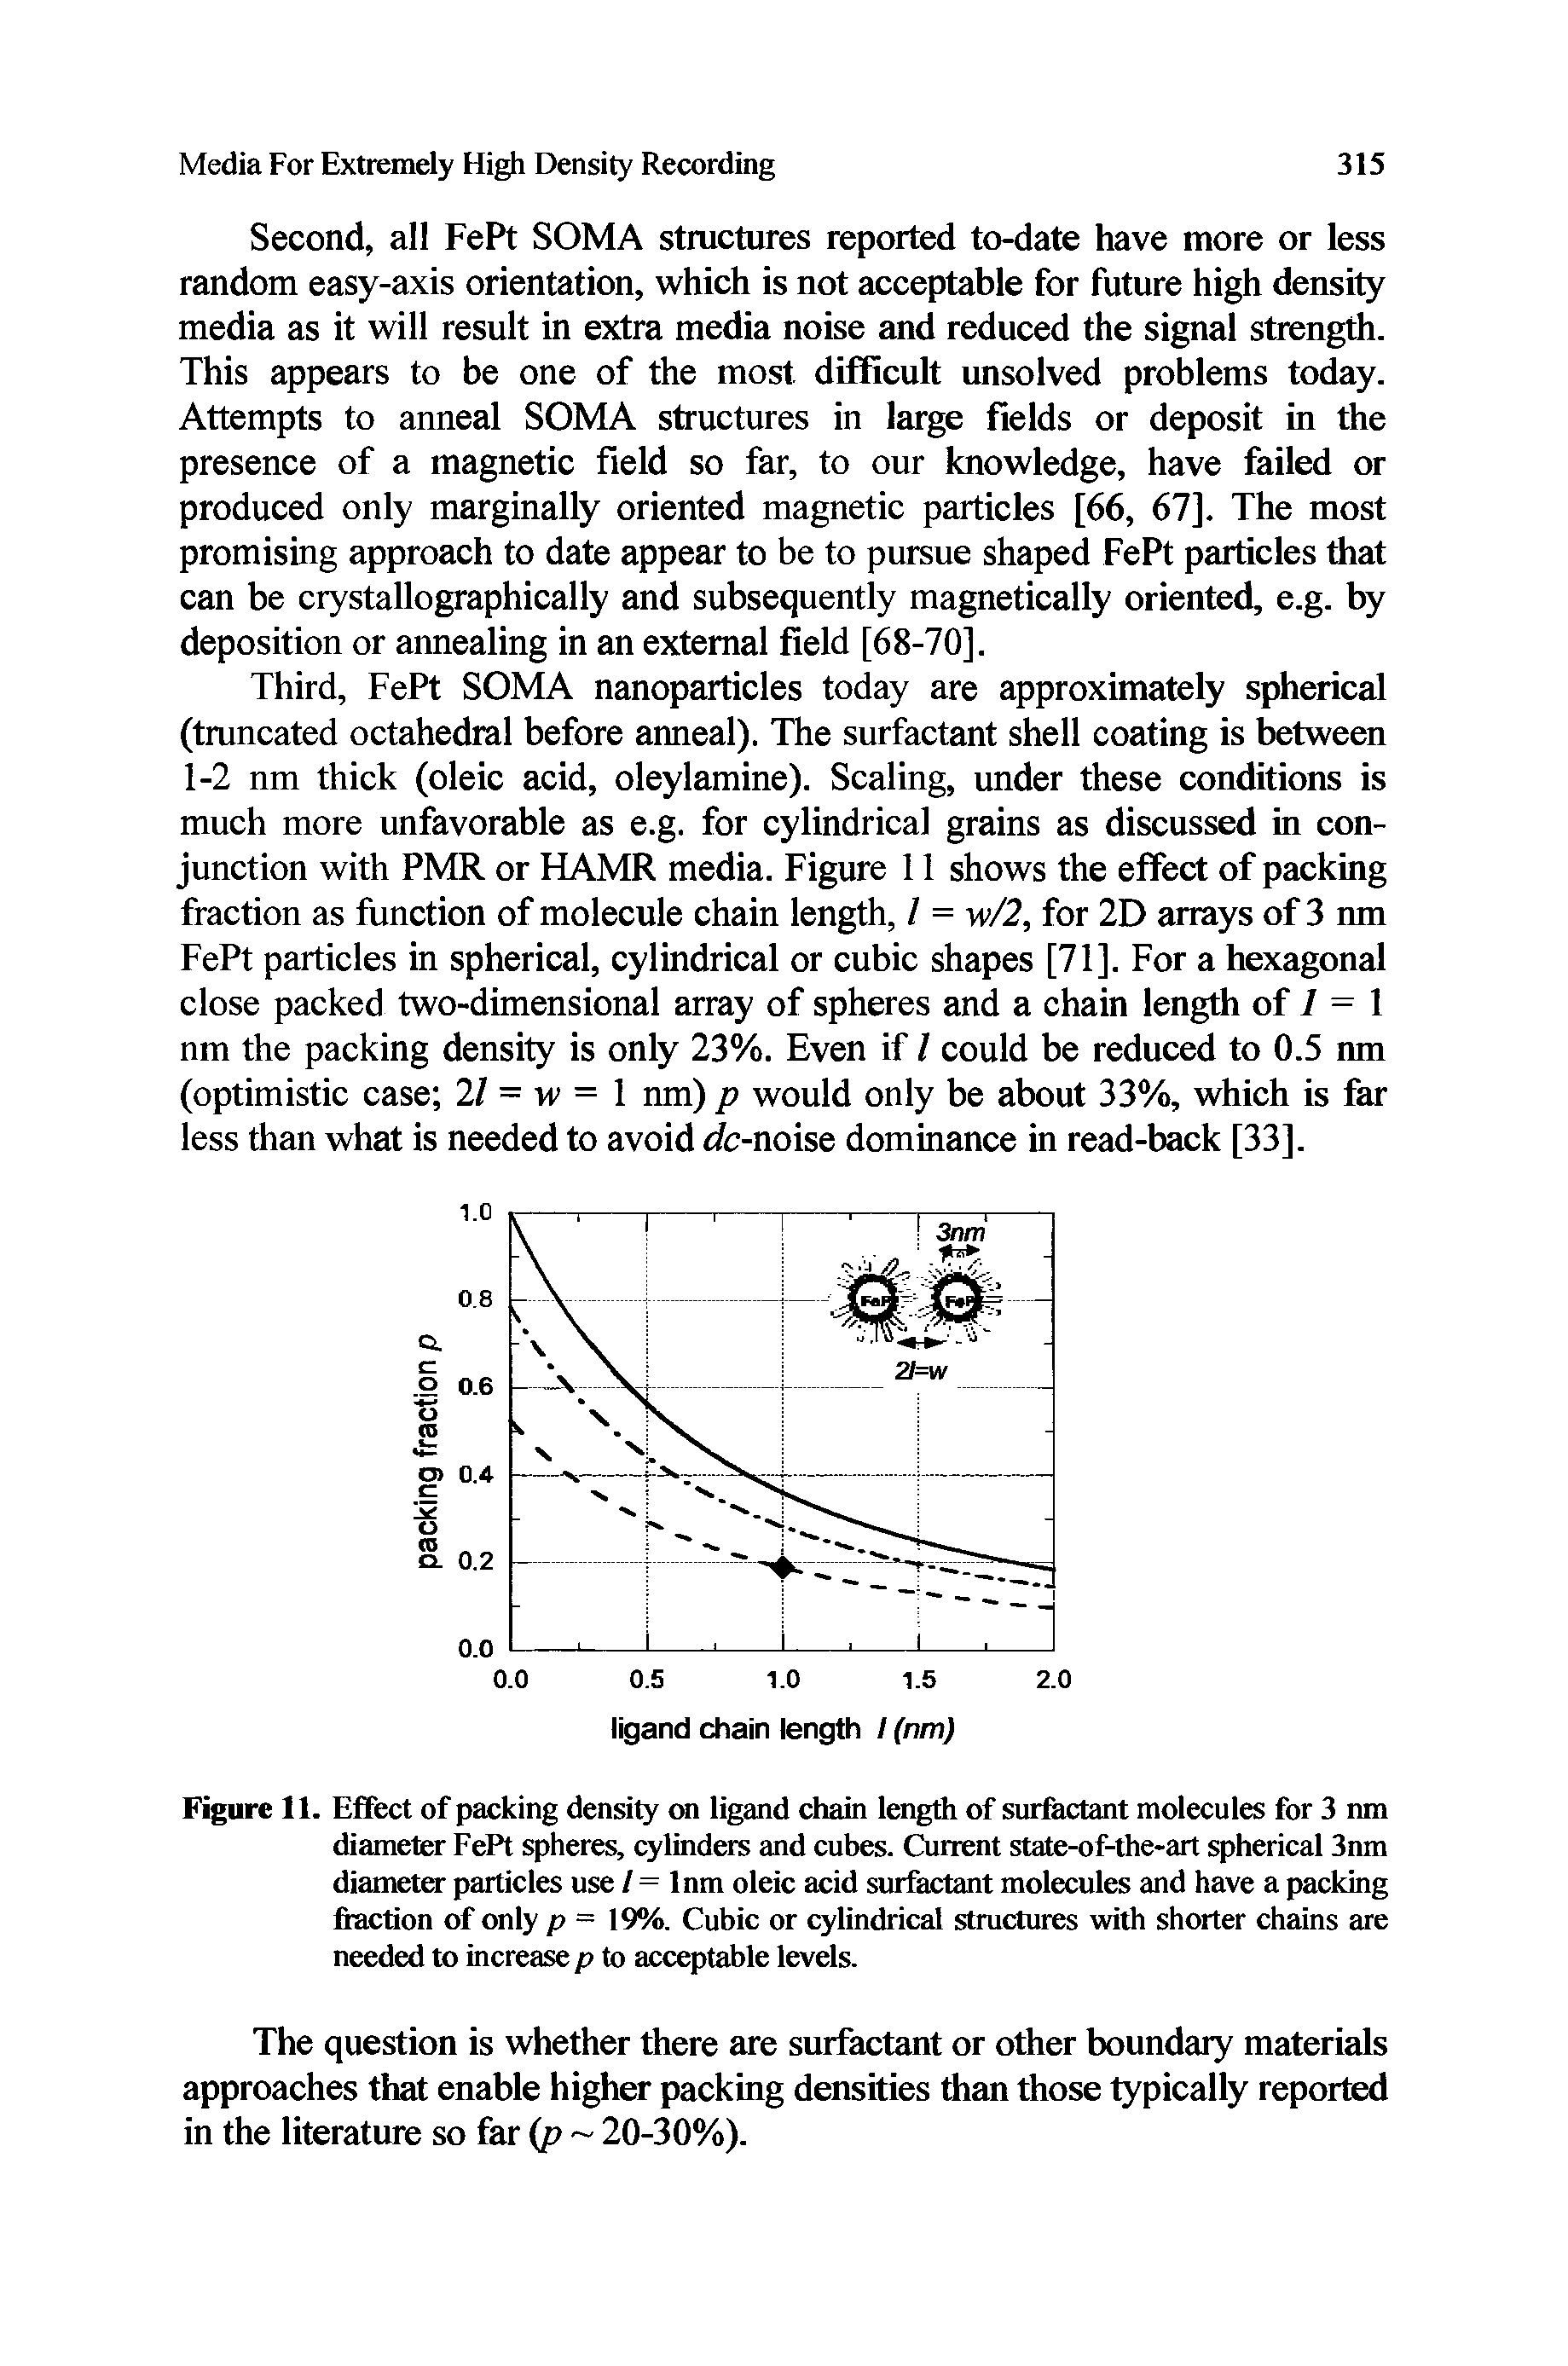 Figure 11. Effect of packing density on ligand chain length of surfactant molecules for 3 nm diameter FePt spheres, cylinders and cubes. Current state-of-the-art spherical 3nm diameter particles use / = lnm oleic acid surfactant molecules and have a packing fraction of only p — 19%. Cubic or cylindrical structures with shorter chains are needed to increase p to acceptable levels.